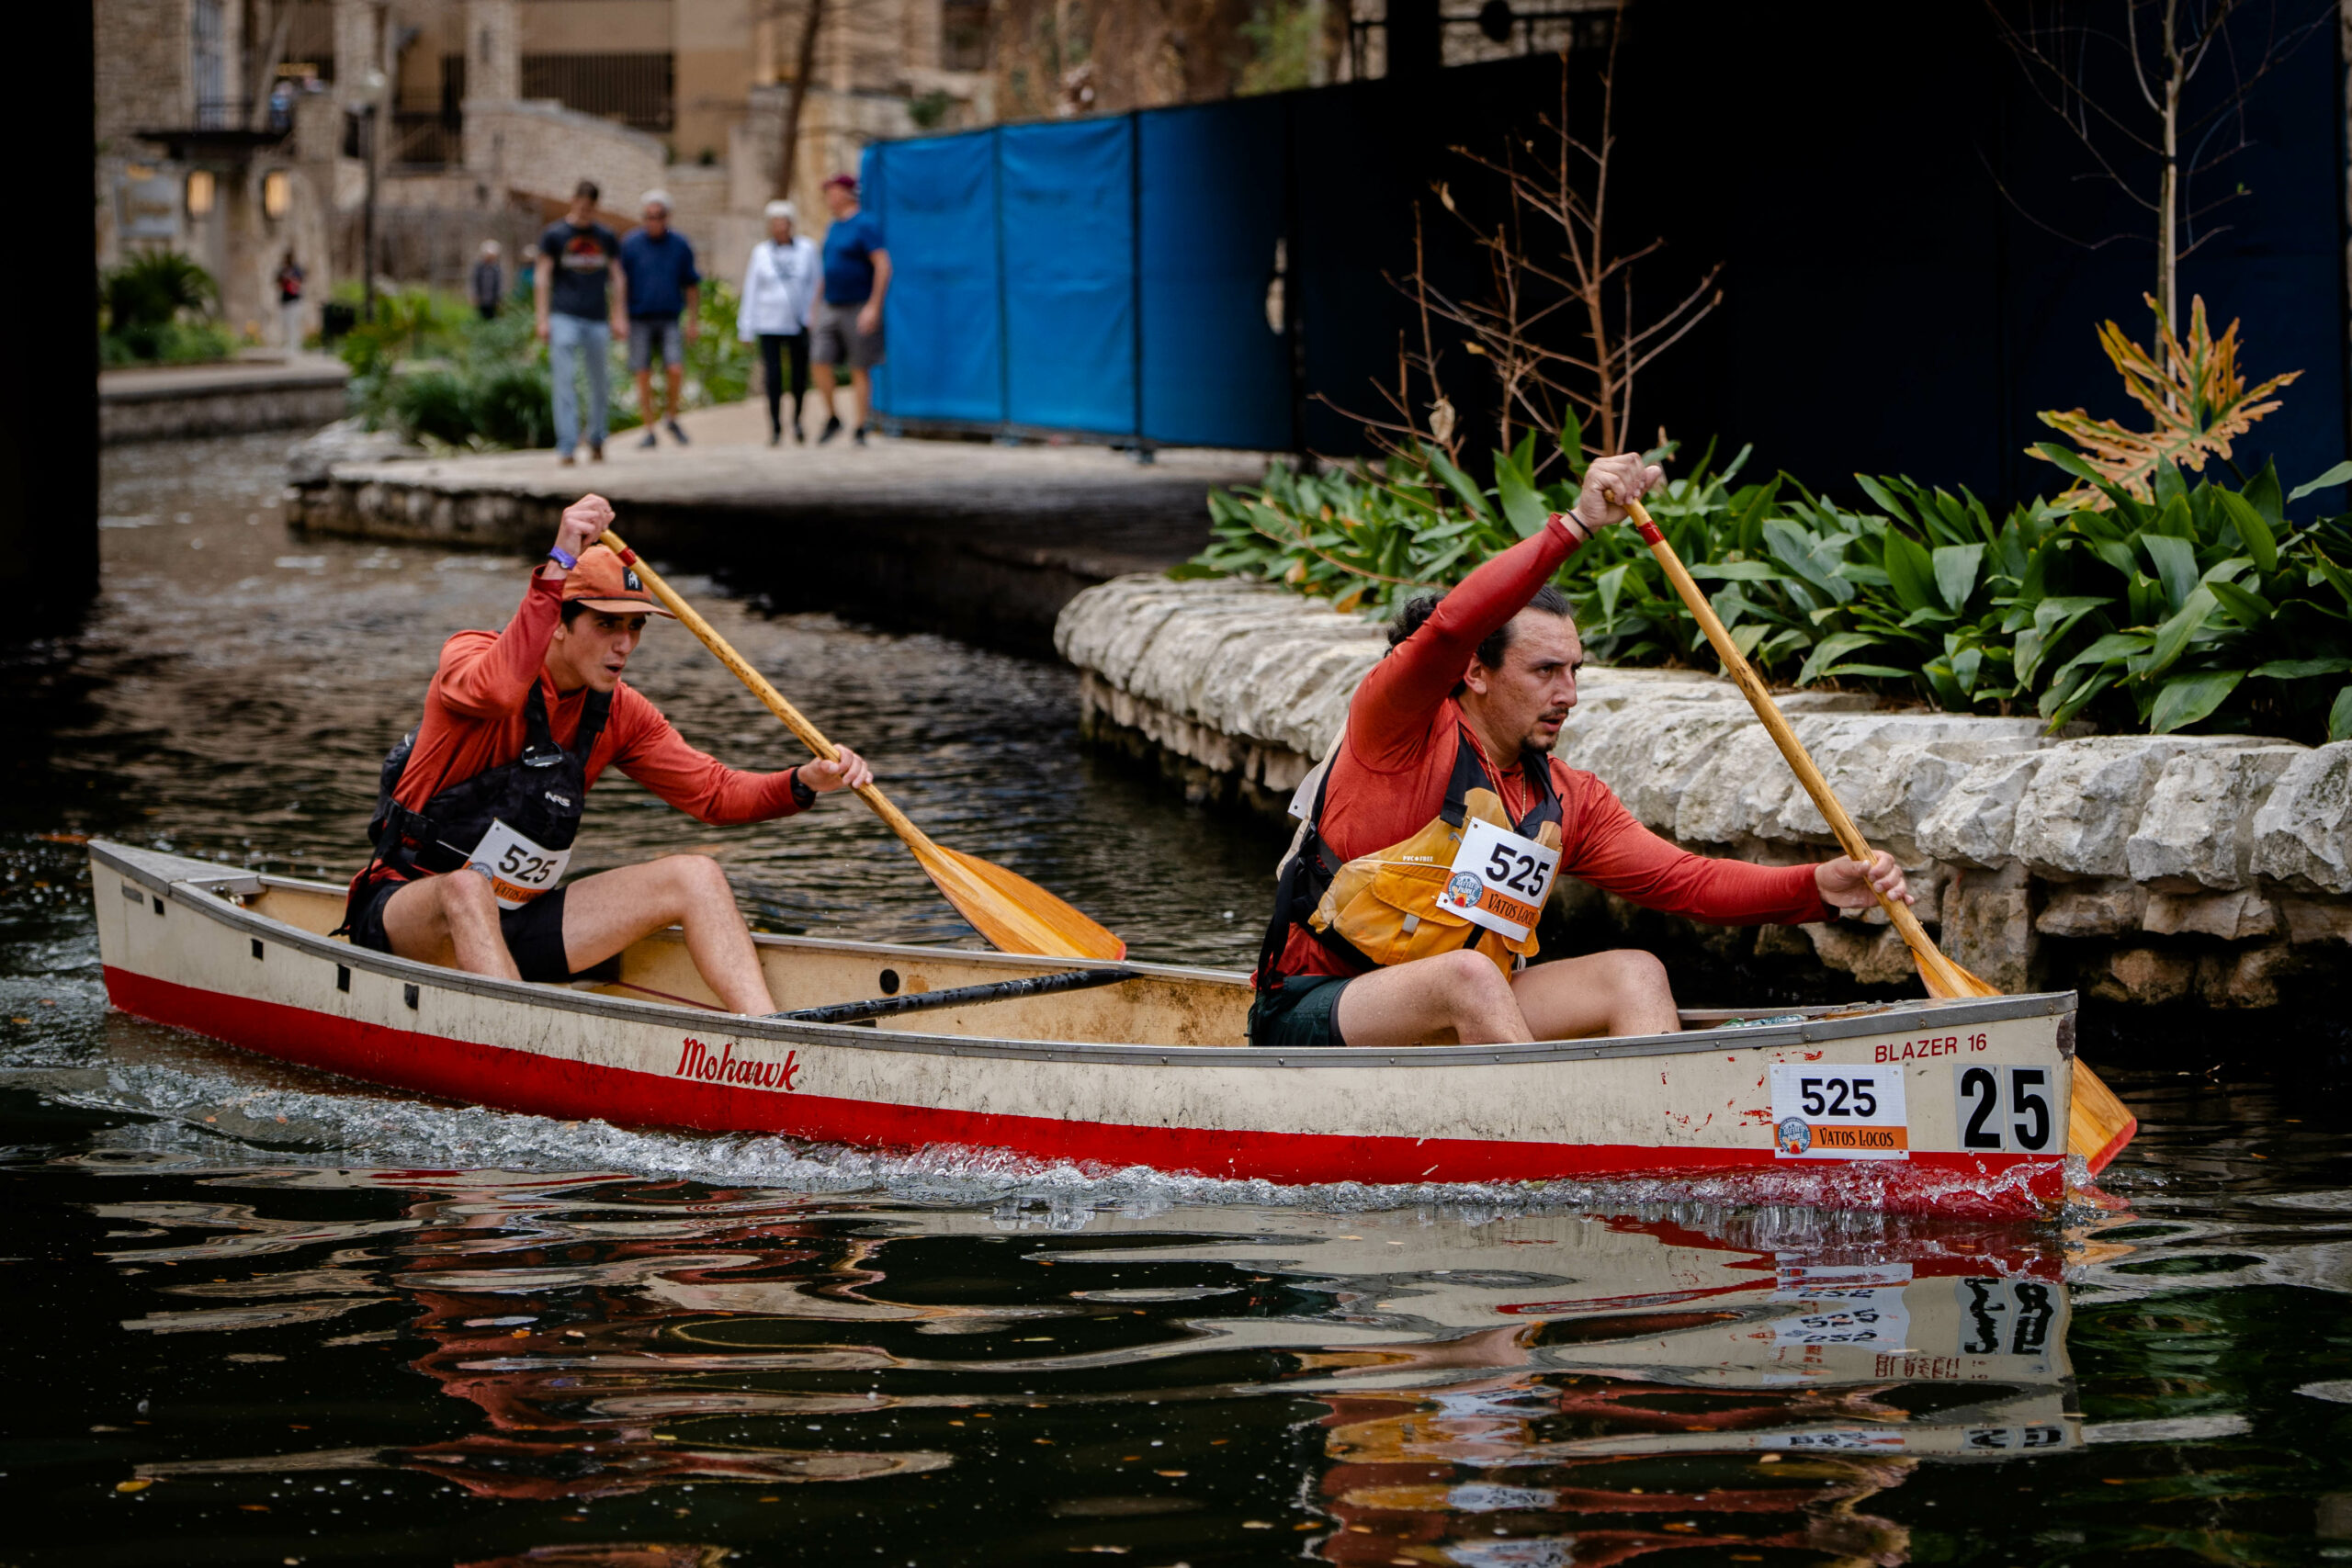 Tandem racers complete a turn down the San Antonio River 